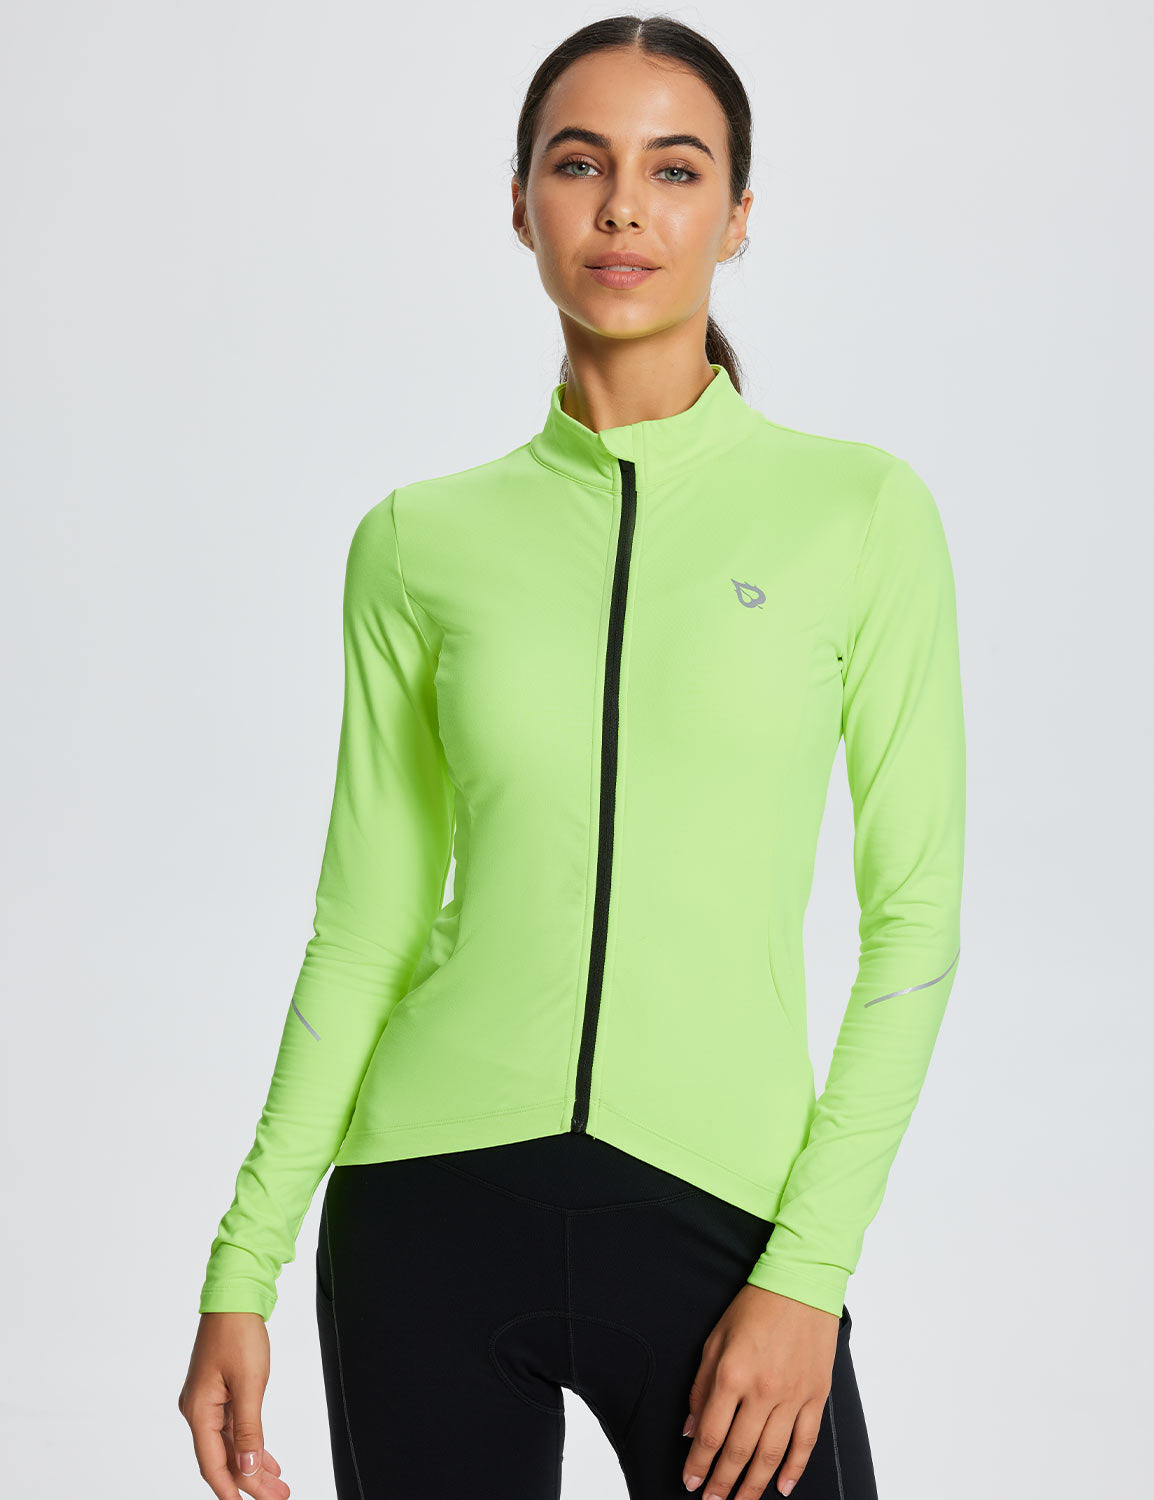 Baleaf Women's Laureate Thermal Pocketed Cycling Jersey dai042 Fluorescent Green Main